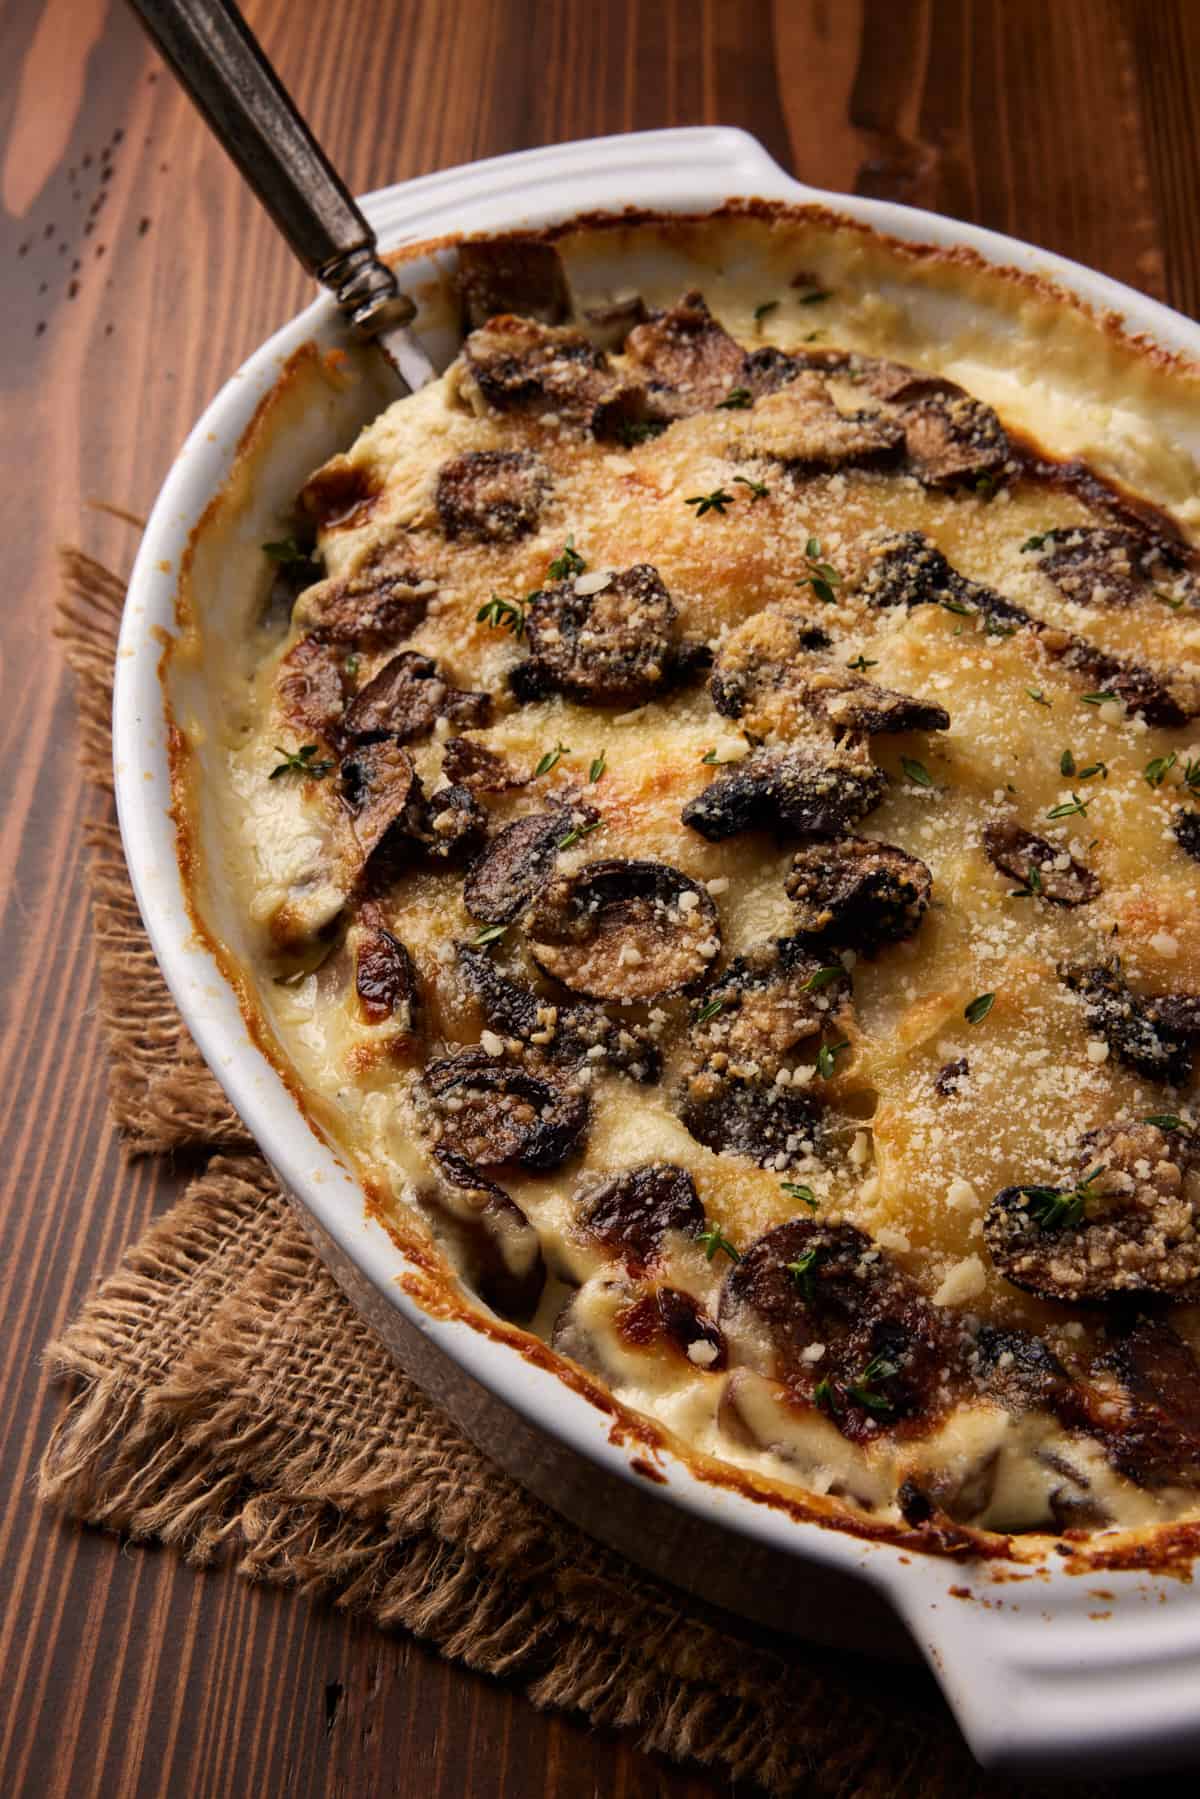 Potato and Mushroom gratin sprinkled with parmesan cheese in a white baking dish.